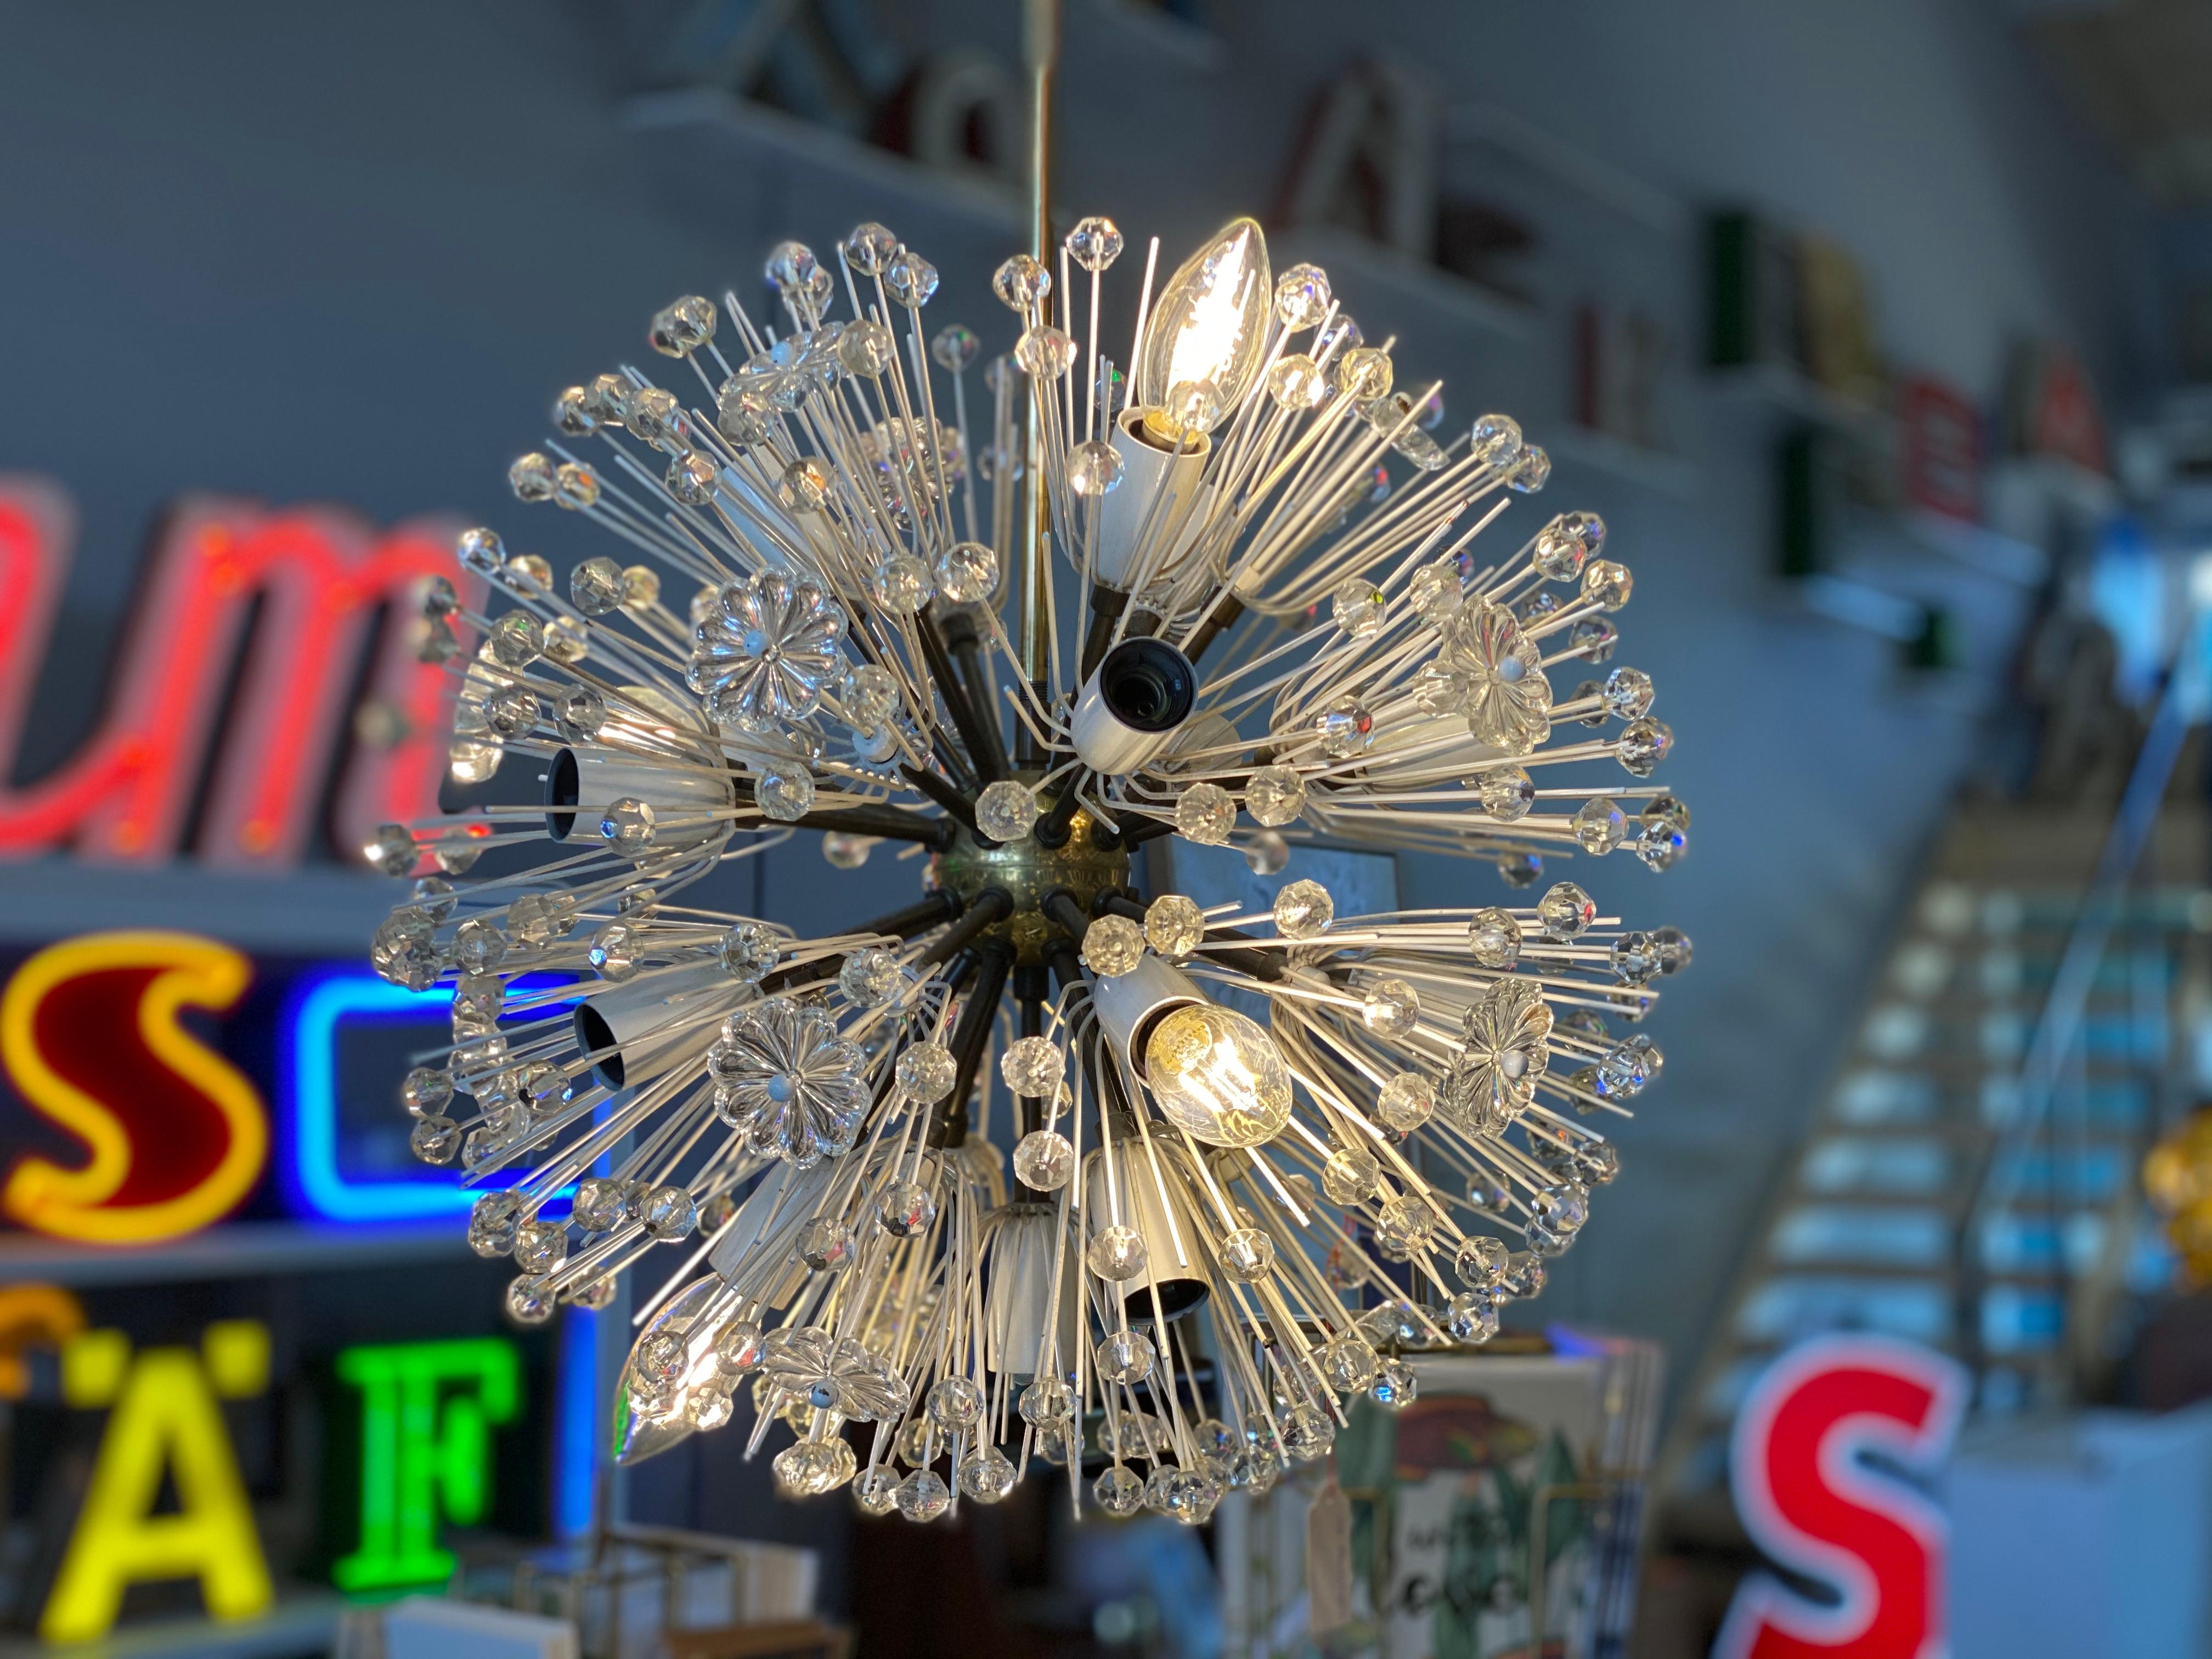 This enchanting chandelier was designed by Emil Stejnar in the 1950s for the Viennese lighting manufacturer Rupert Nikoll. Stejnar's ceiling lamps are characterized by star shapes and delicate glass lacquer. This specimen, the Sputnik lamp, is